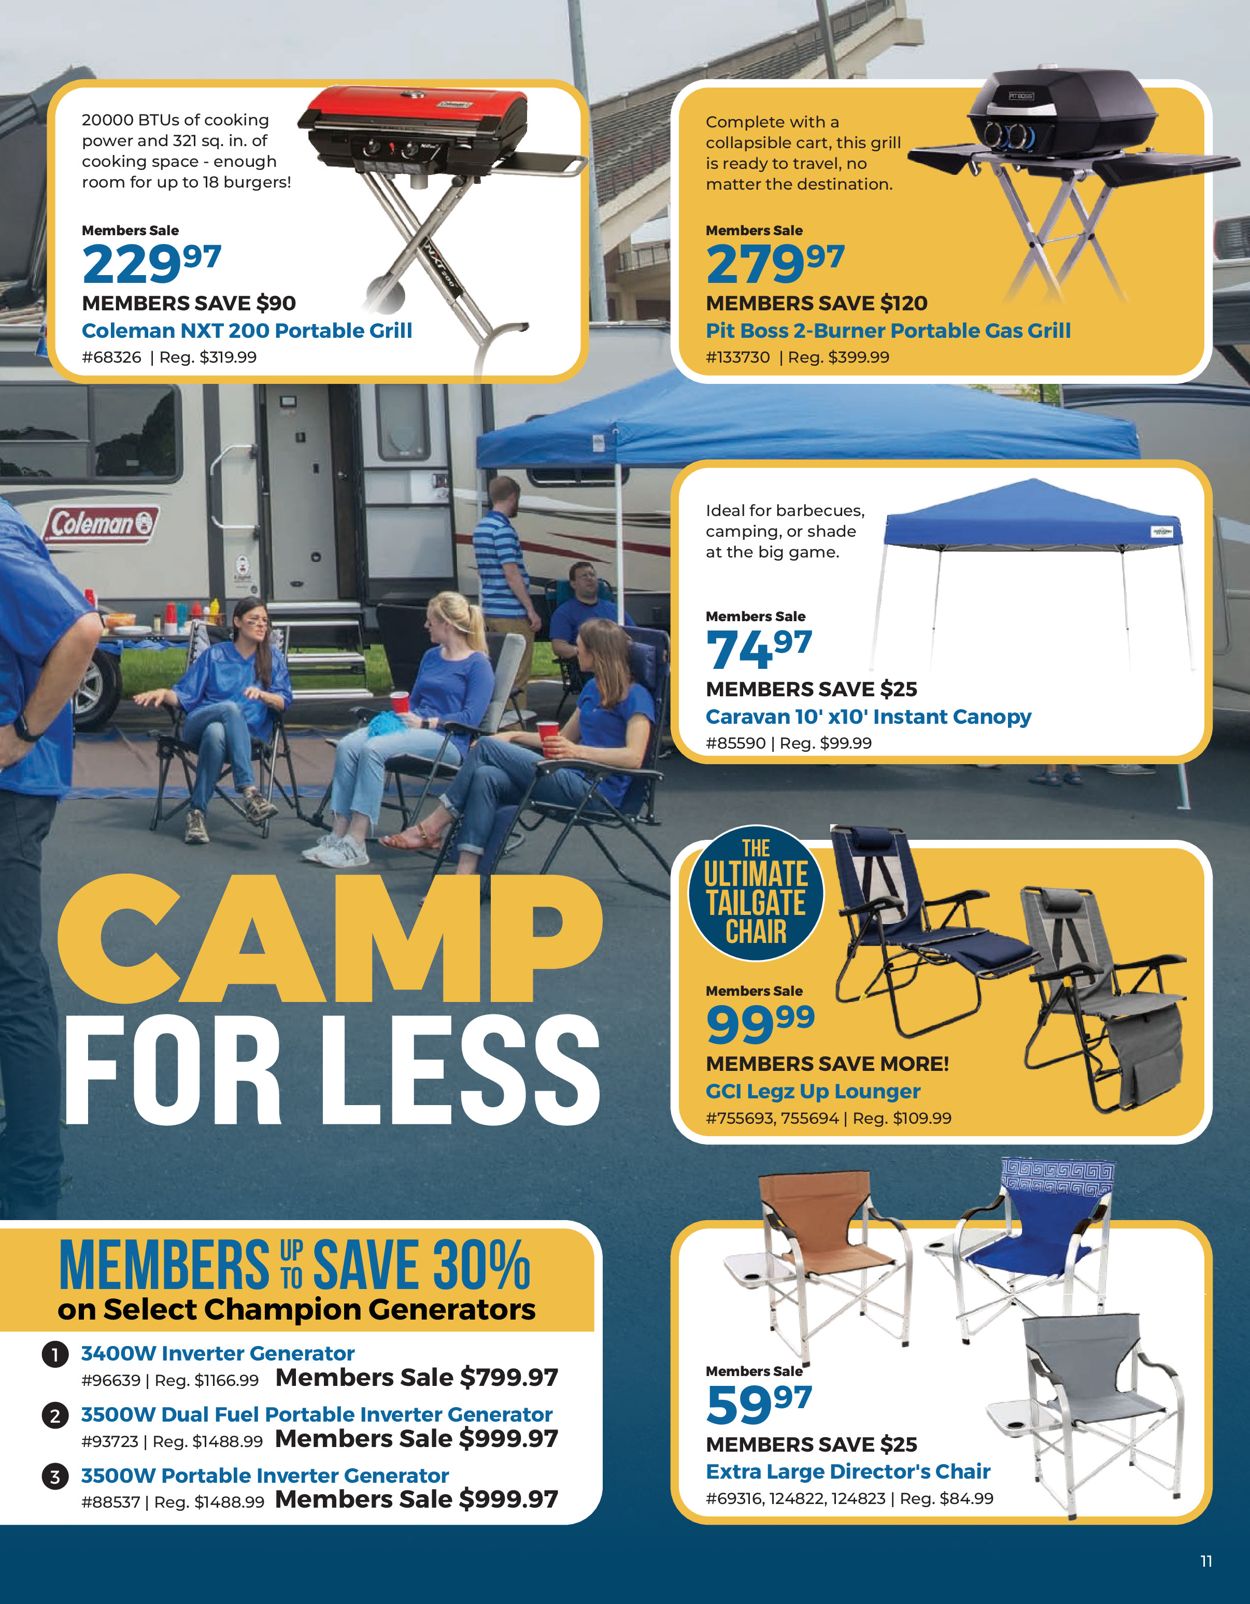 Camping World Ad from 08/04/2022